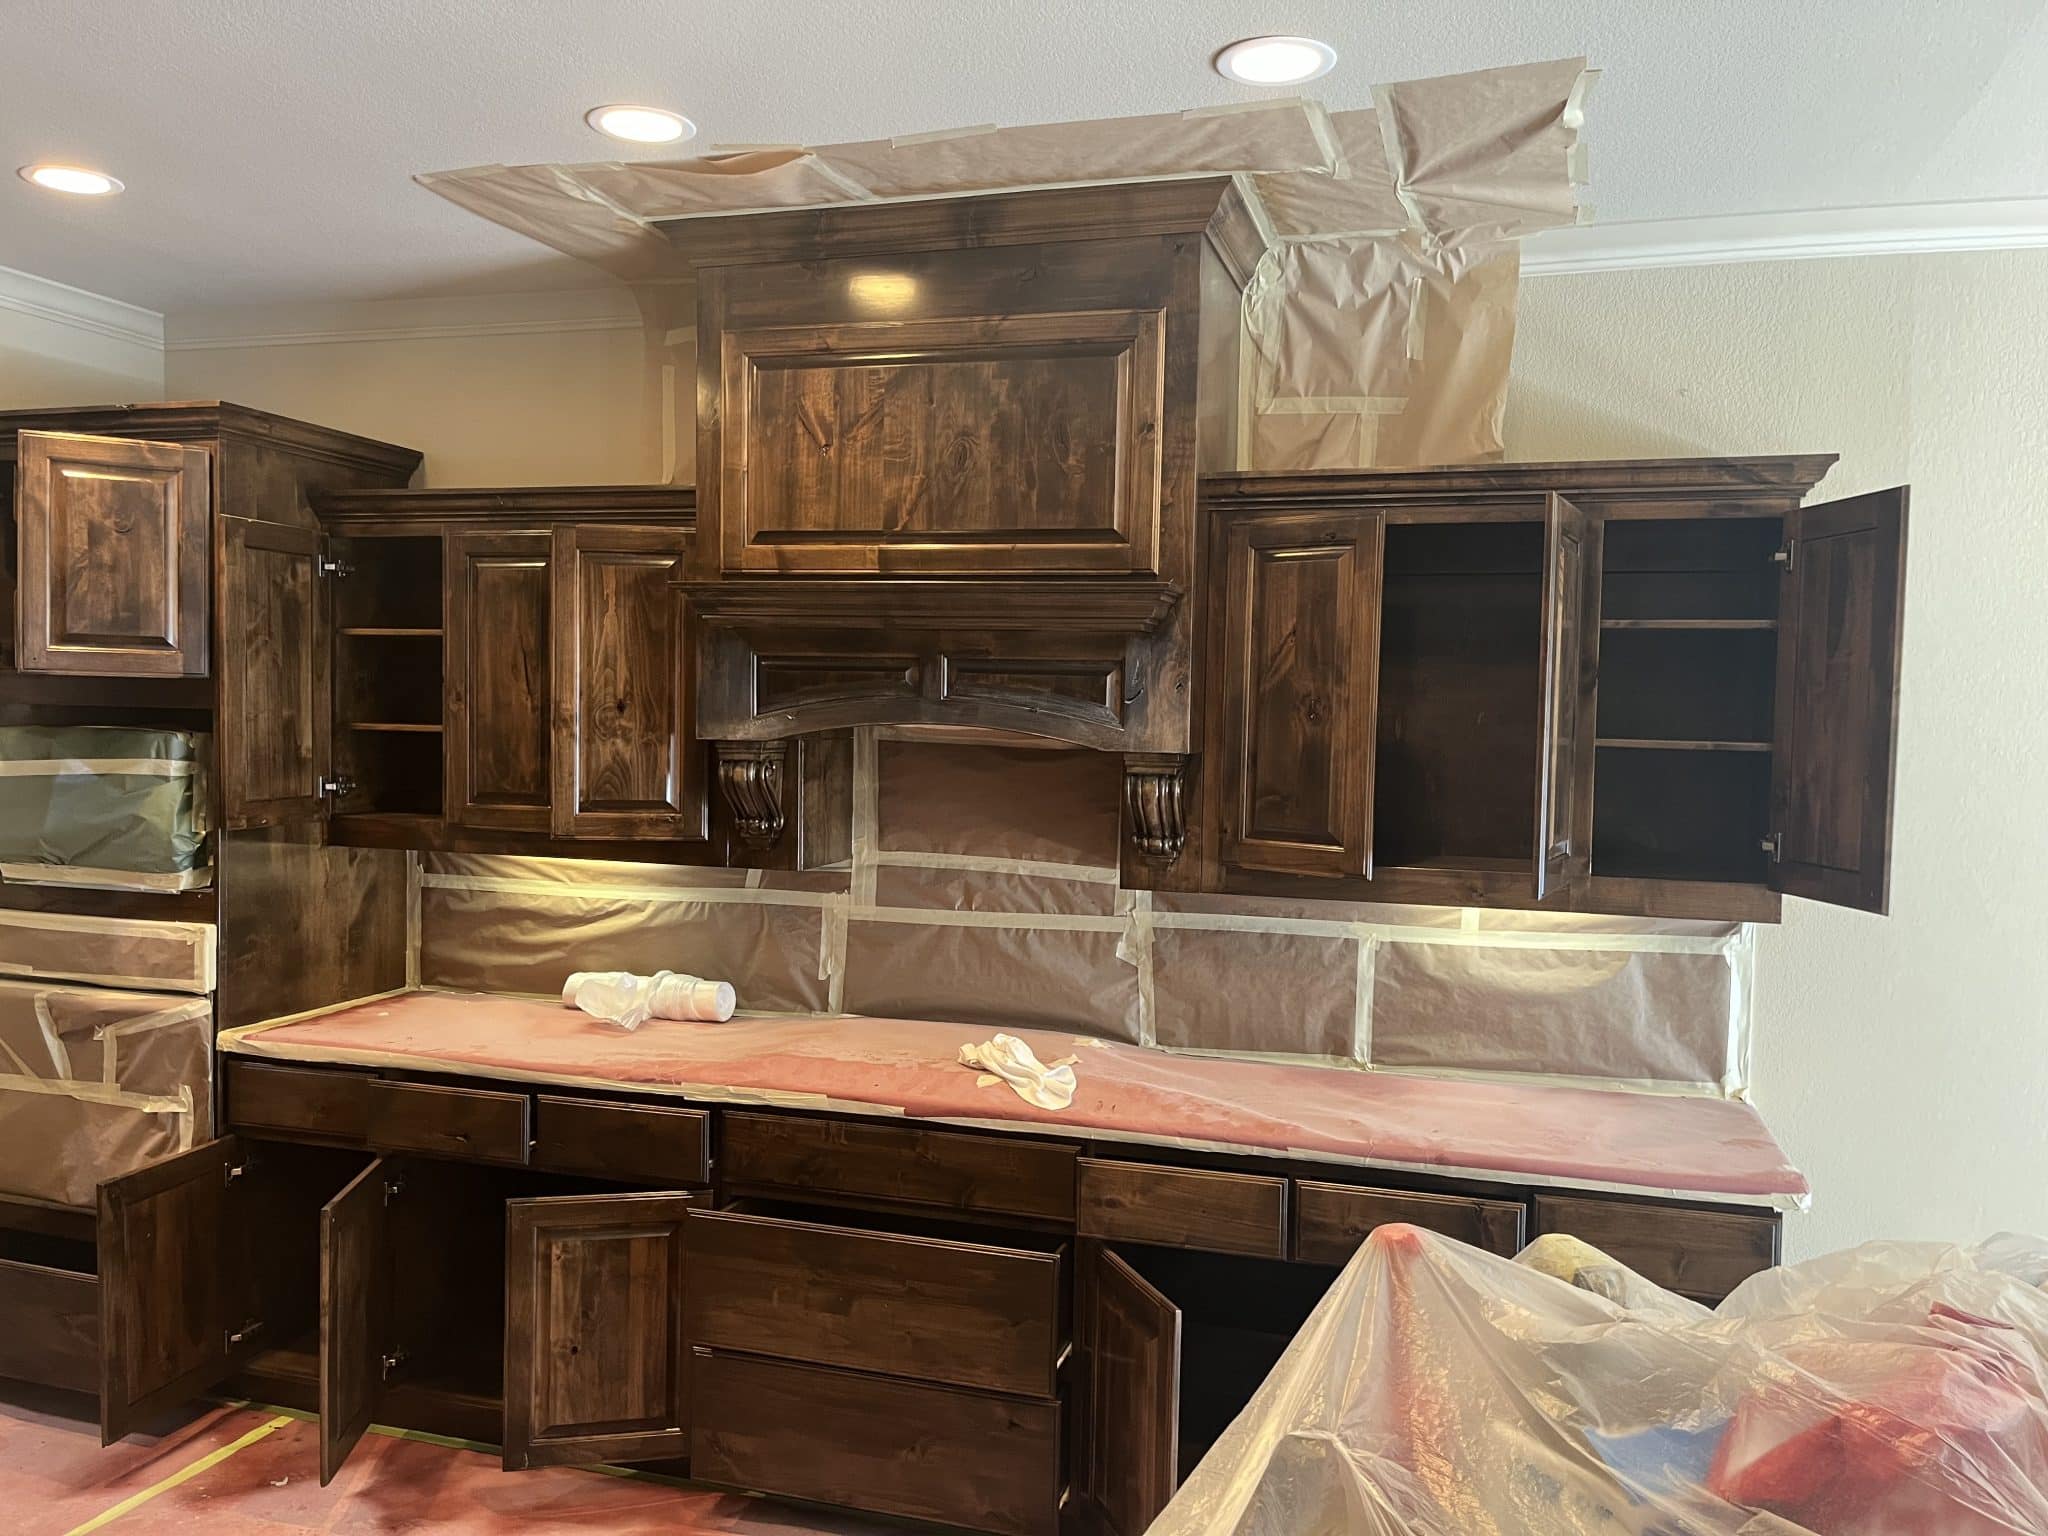 Kitchen cabinets being restained